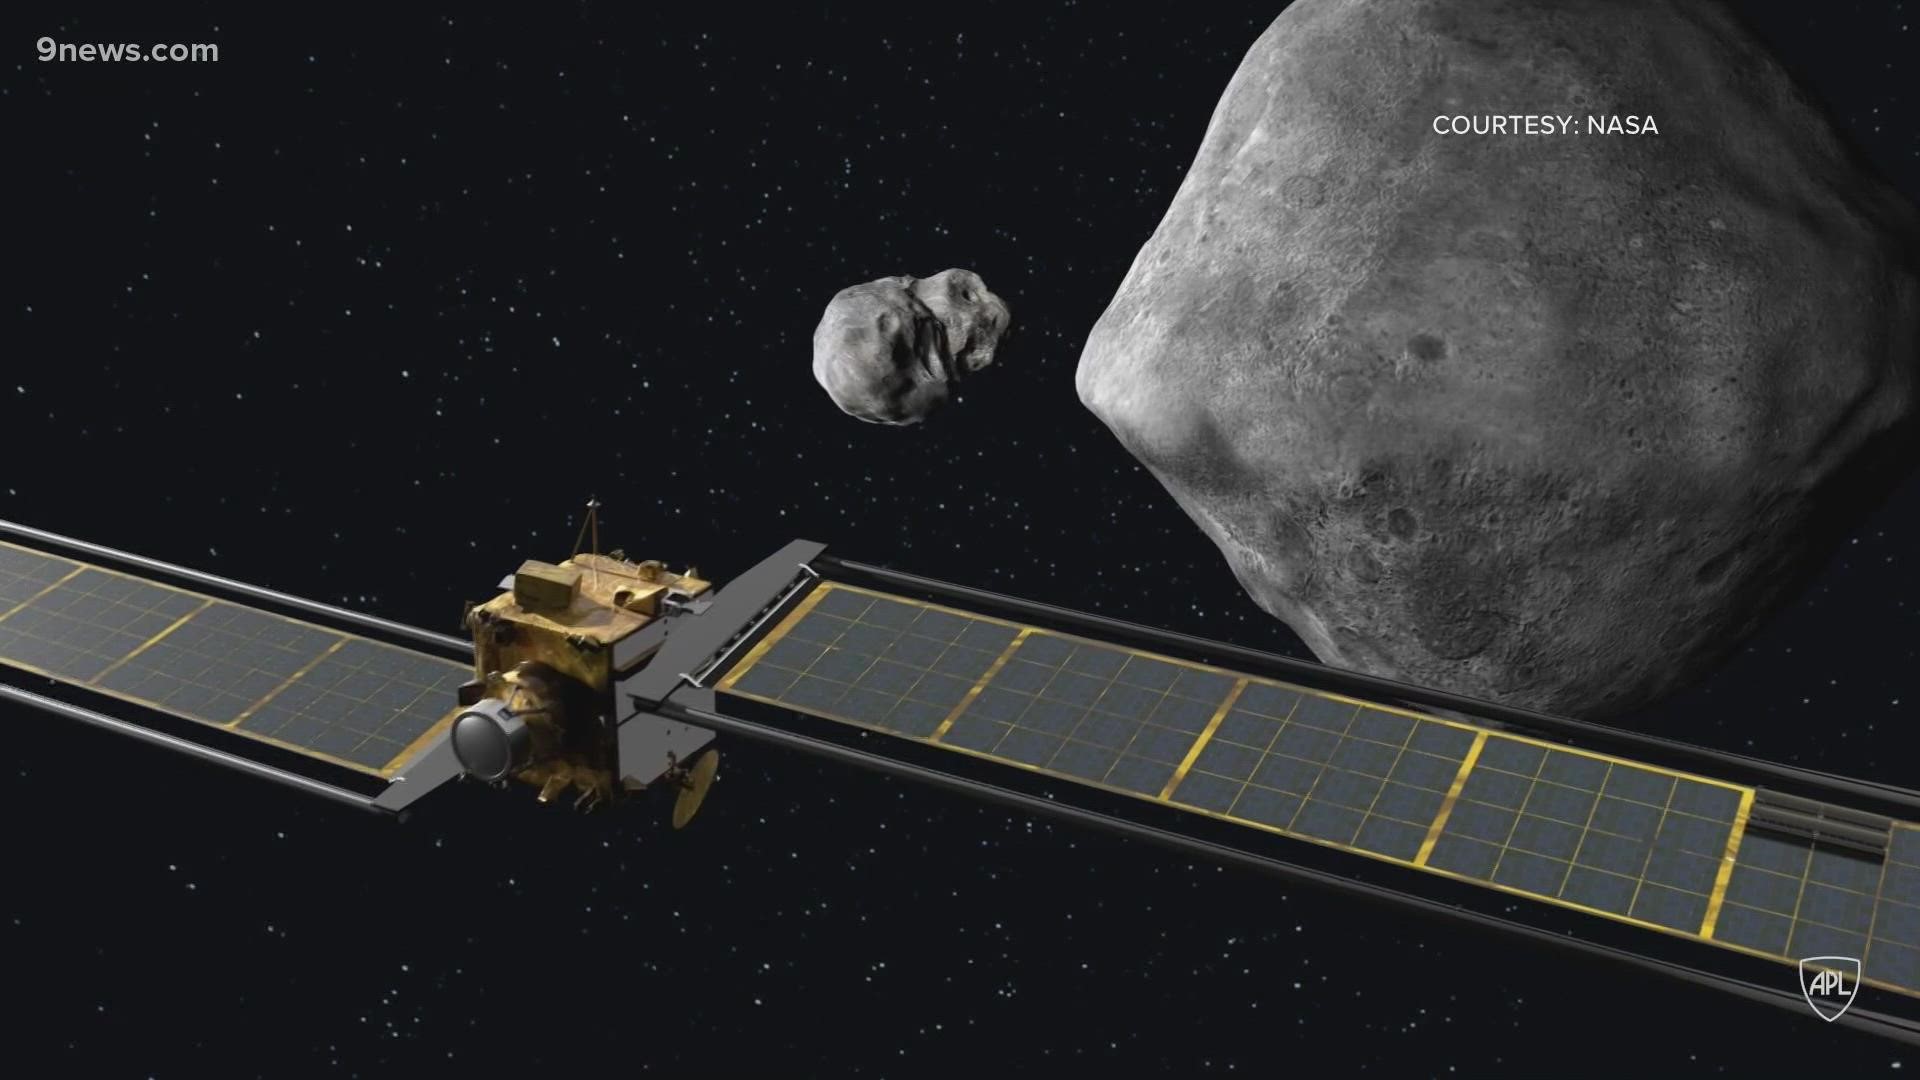 University of Colorado professor Jay McMahon is one of the participating scientists on this mission called DART, or Double Asteroid Redirect Test.